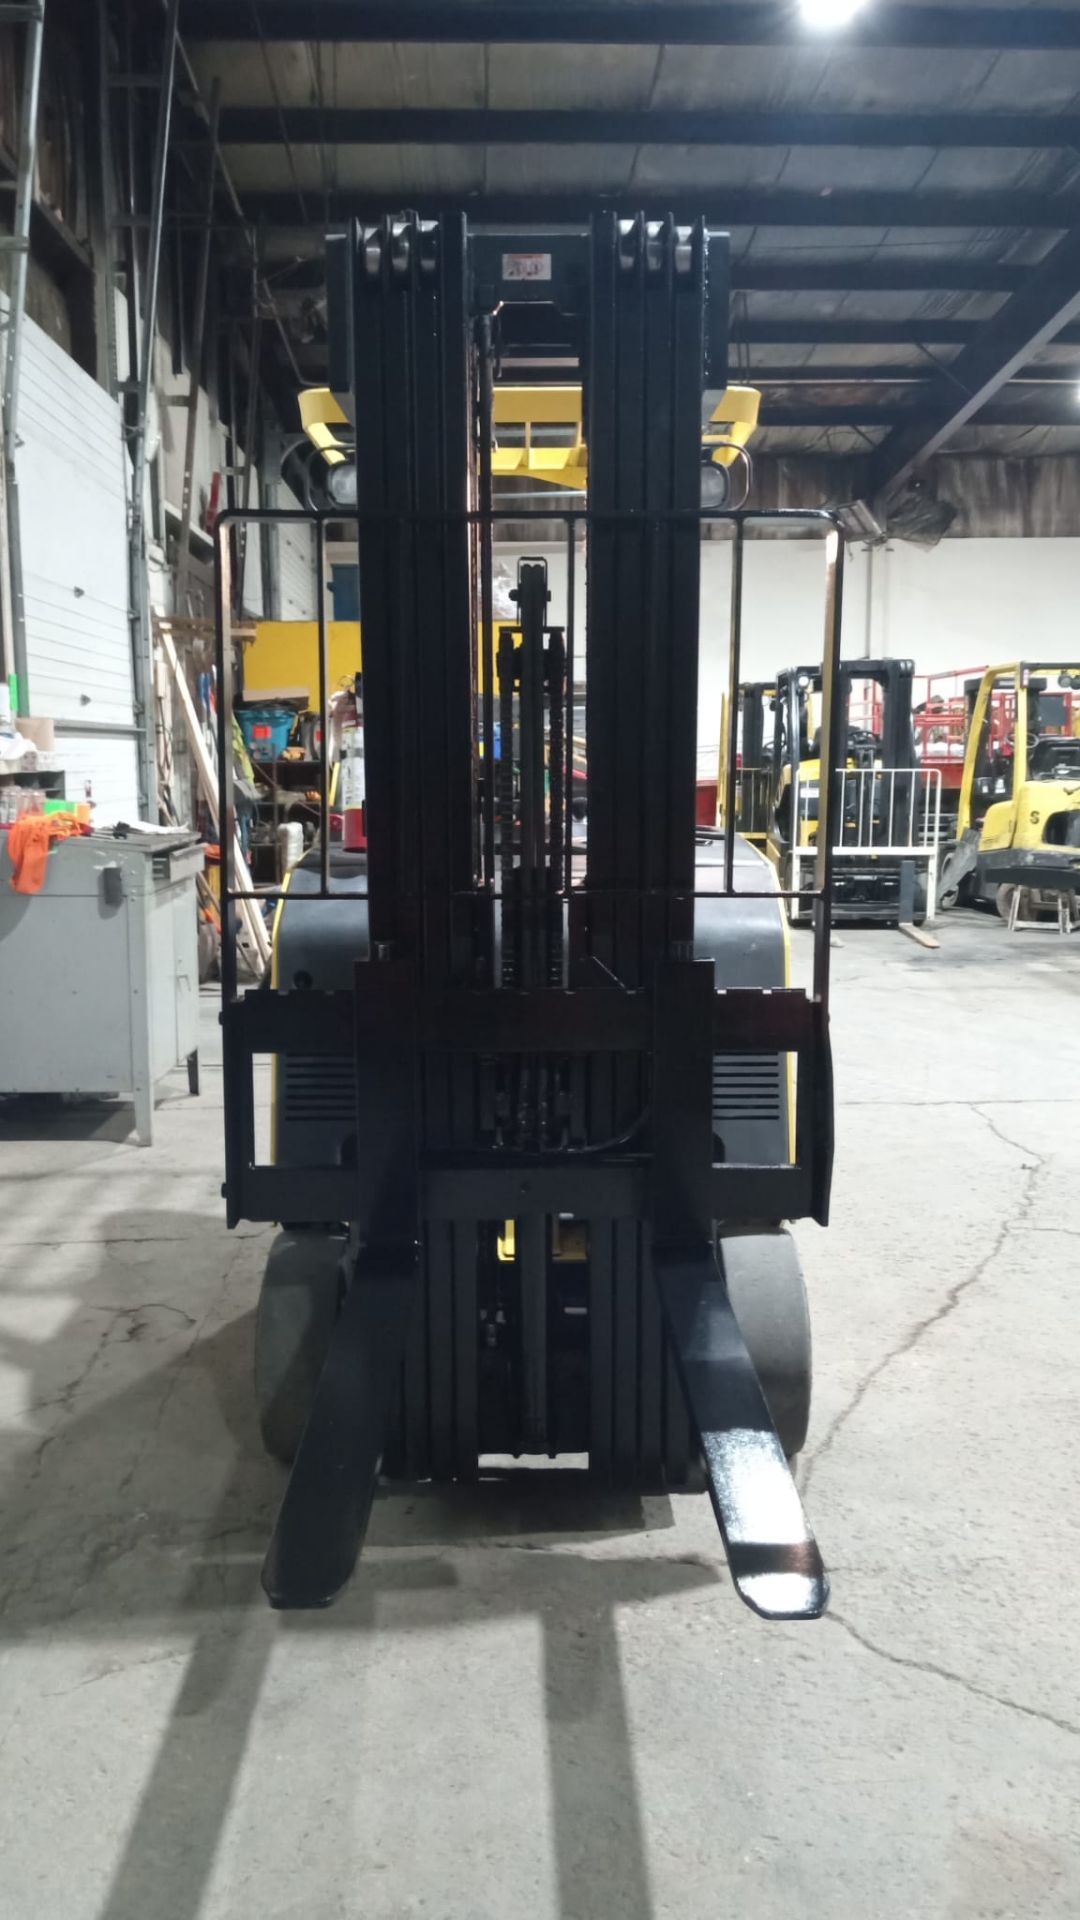 2014 Hyster 3,500lbs Capacity Electric Stand On Forklift 4-STAGE MAST 36V with sideshift - FREE - Image 6 of 6